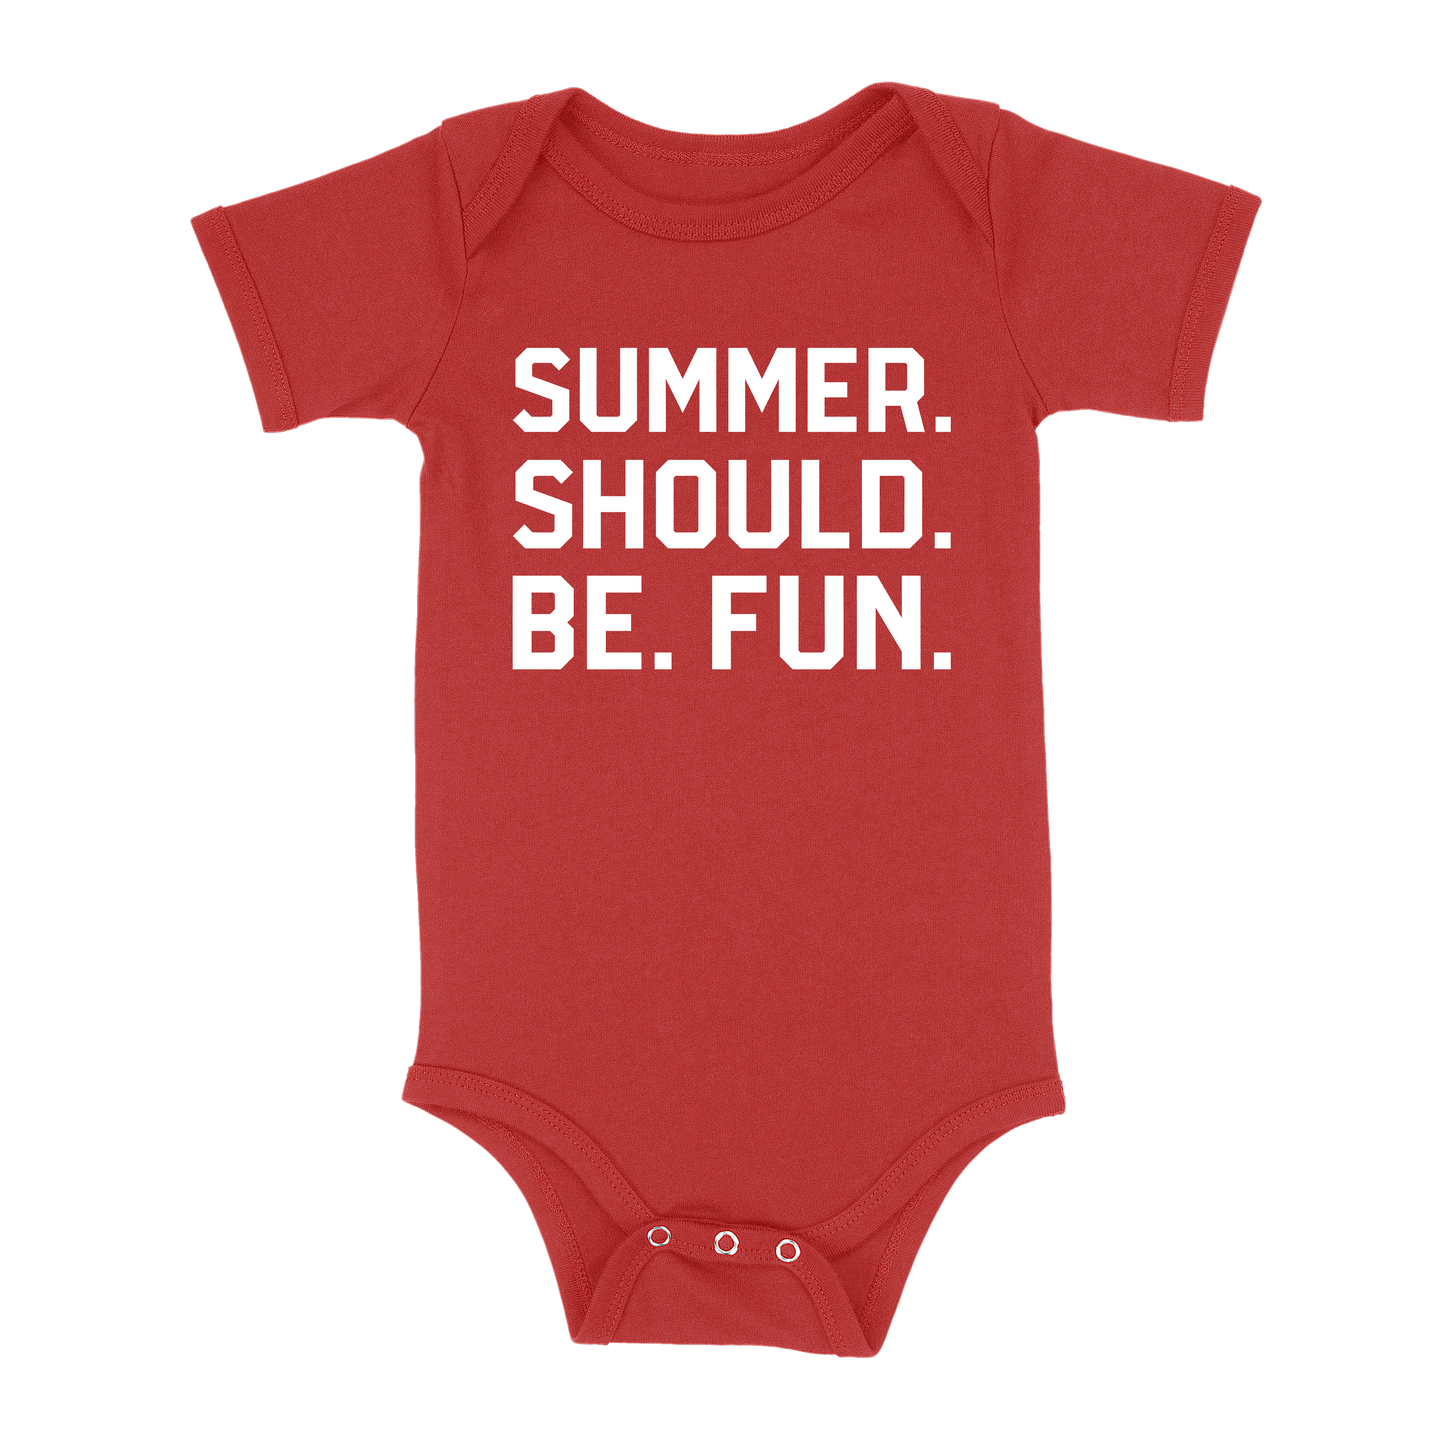 Summer. Should. Be. Fun. Baby - Red